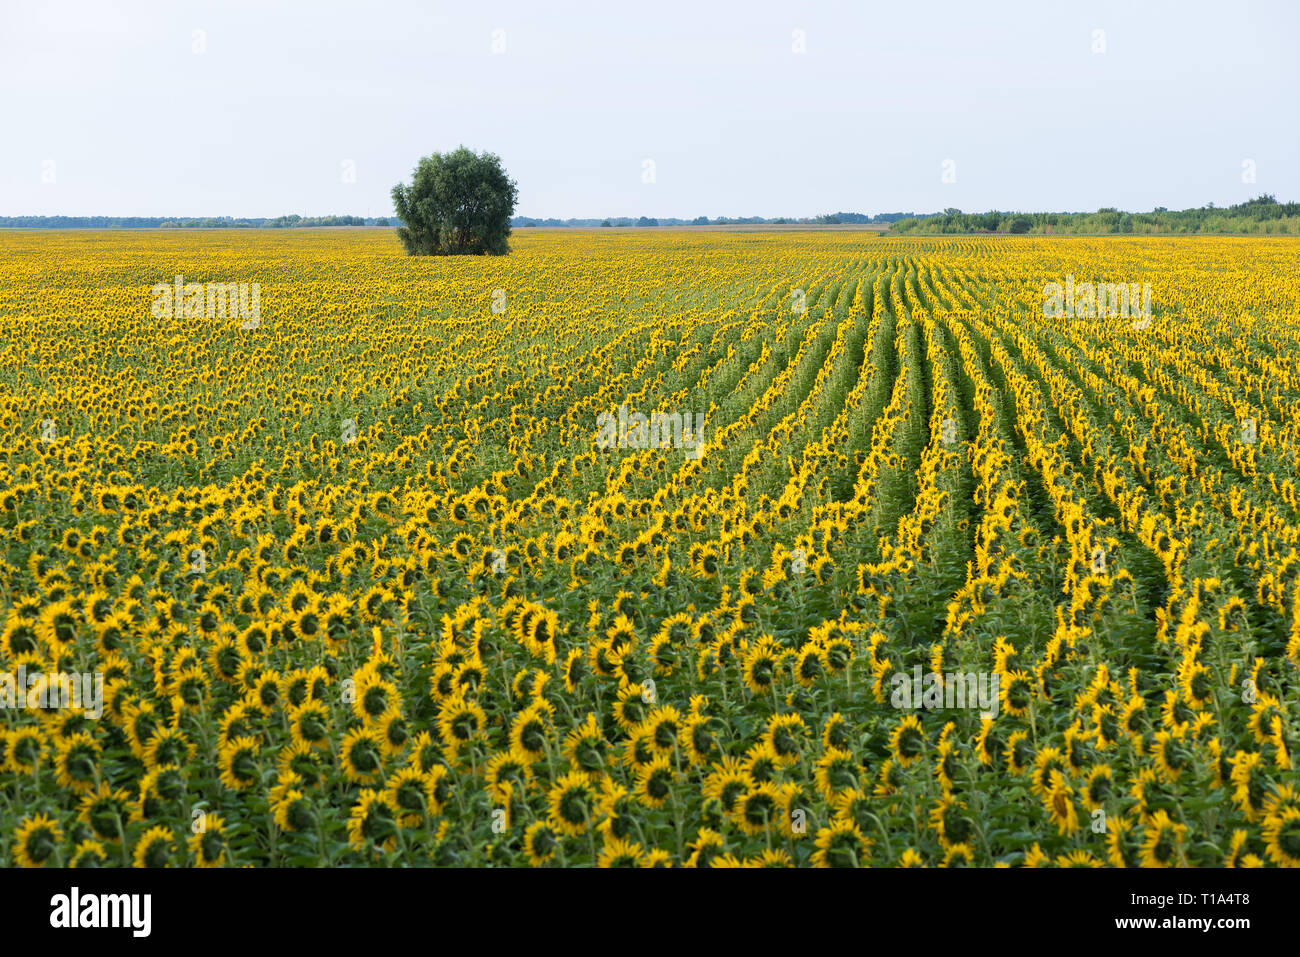 Summer rural landscape. Flowering sunflowers in a field and a lonely tree Stock Photo